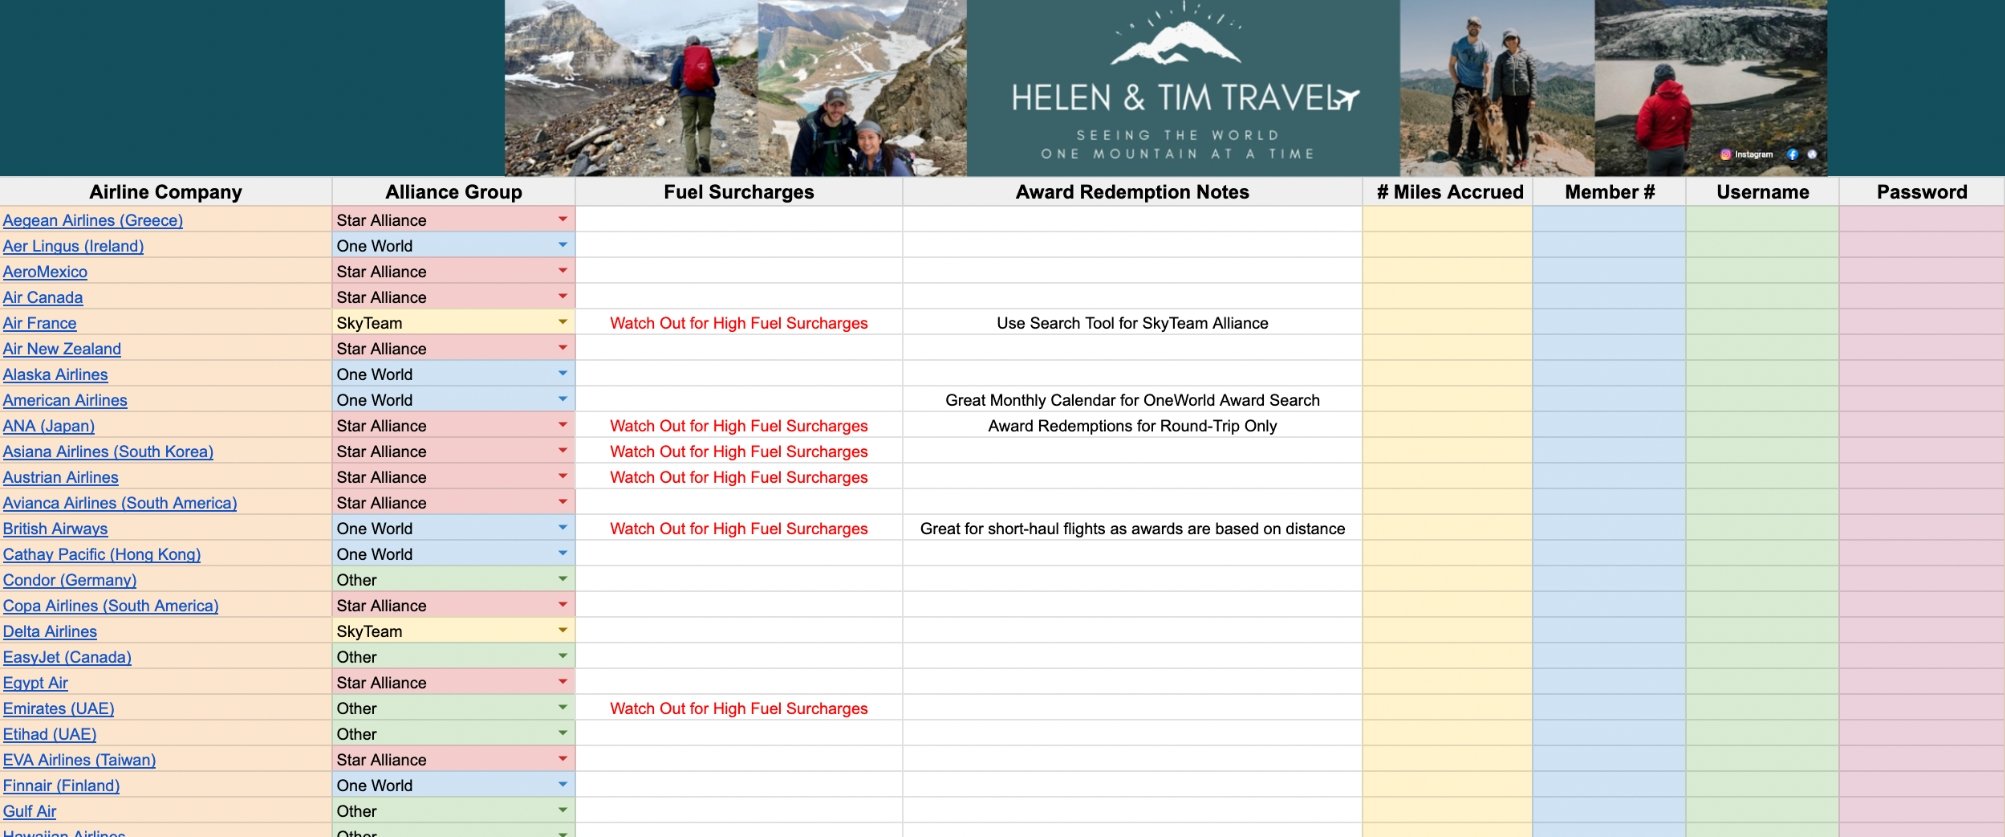 Save Money to Travel: Travel Points and Miles - Helen & Tim Travel